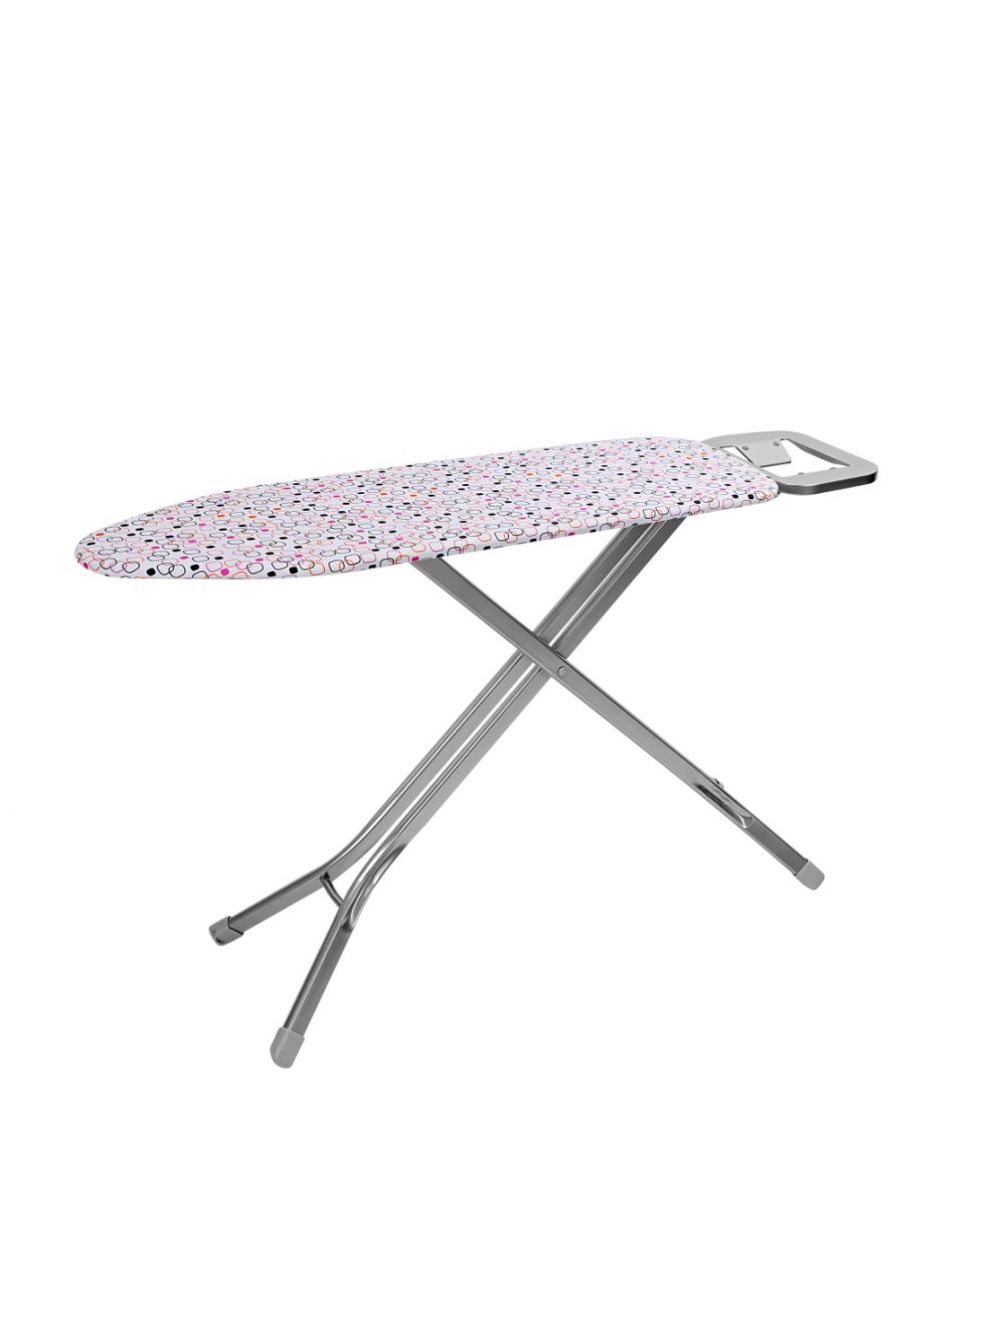 Royalford RF367IBS Mesh Ironing Board with Safety Lock System, 91x30 CM